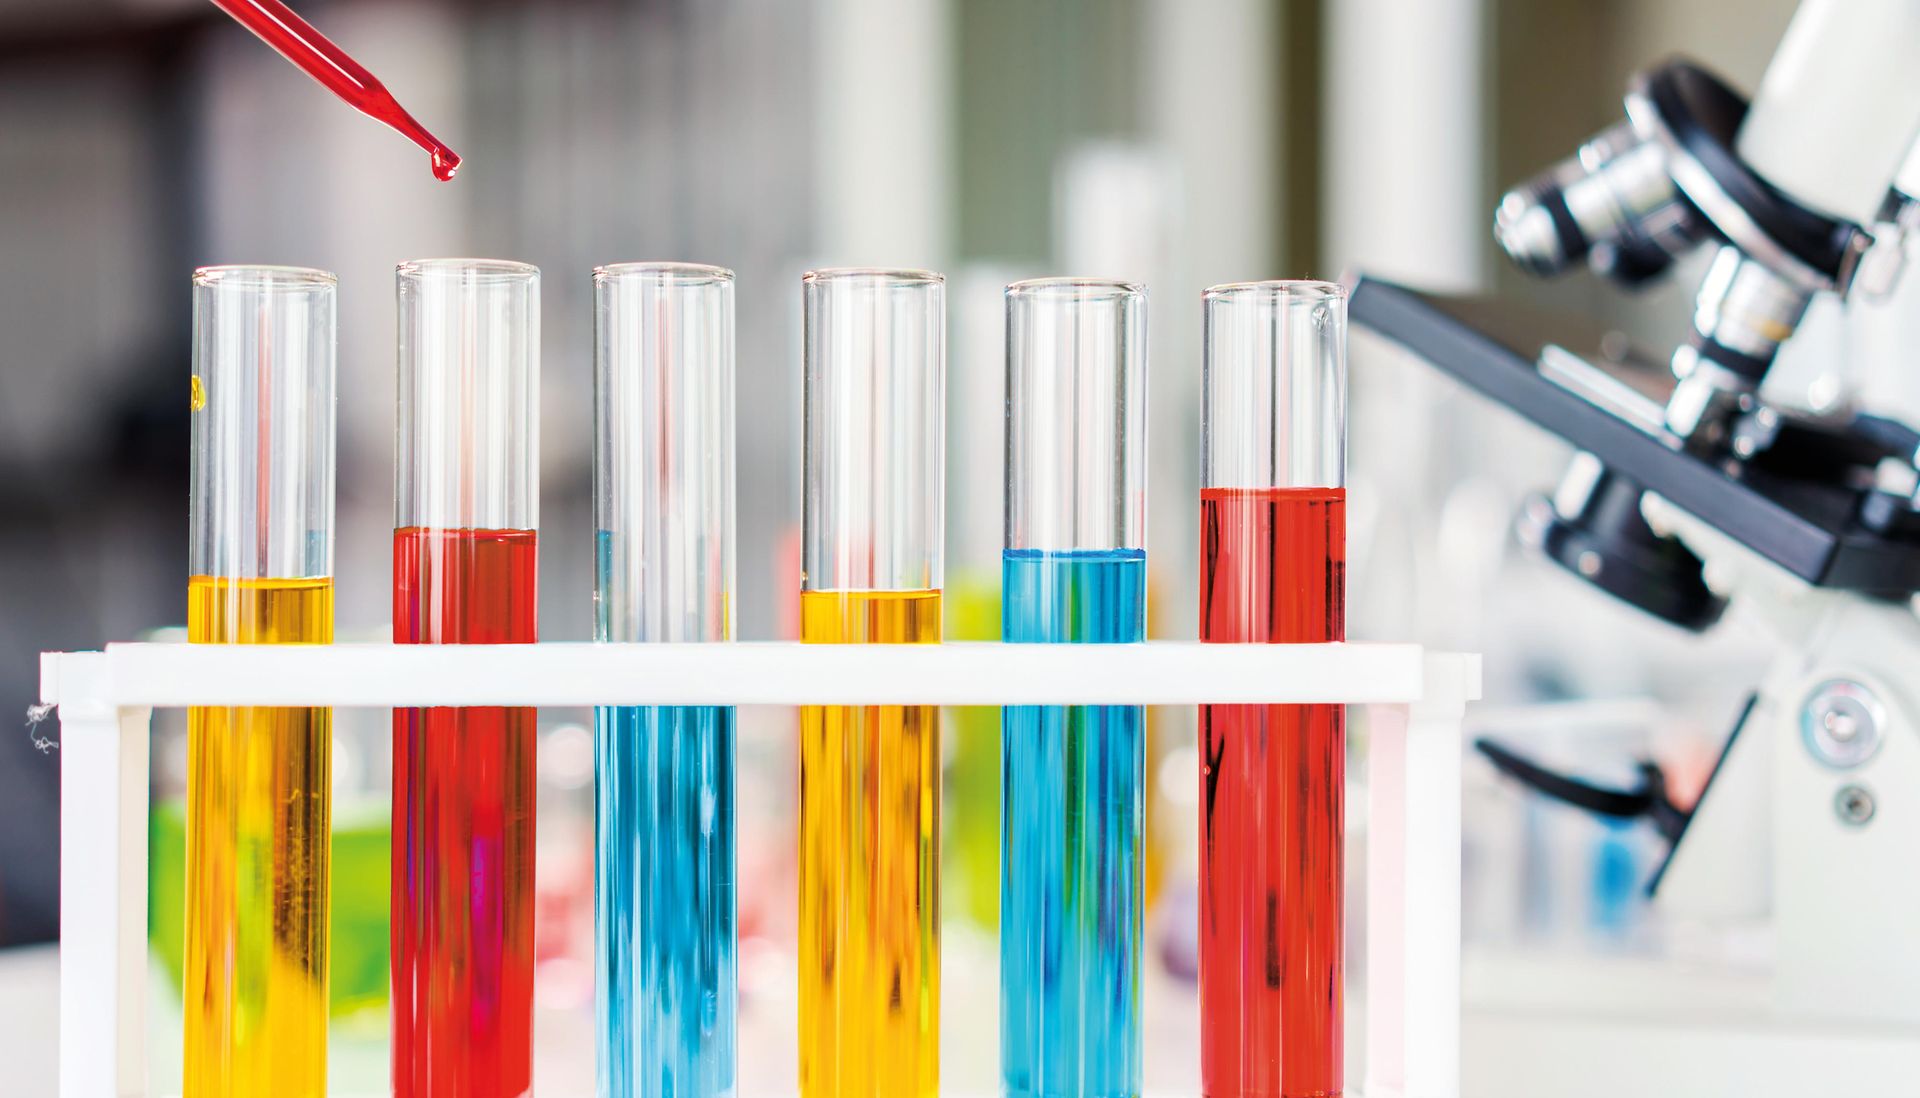 Test tubes are filled with red, yellow and blue liquids representing chemicals for evaluation and registration in the REACH context.